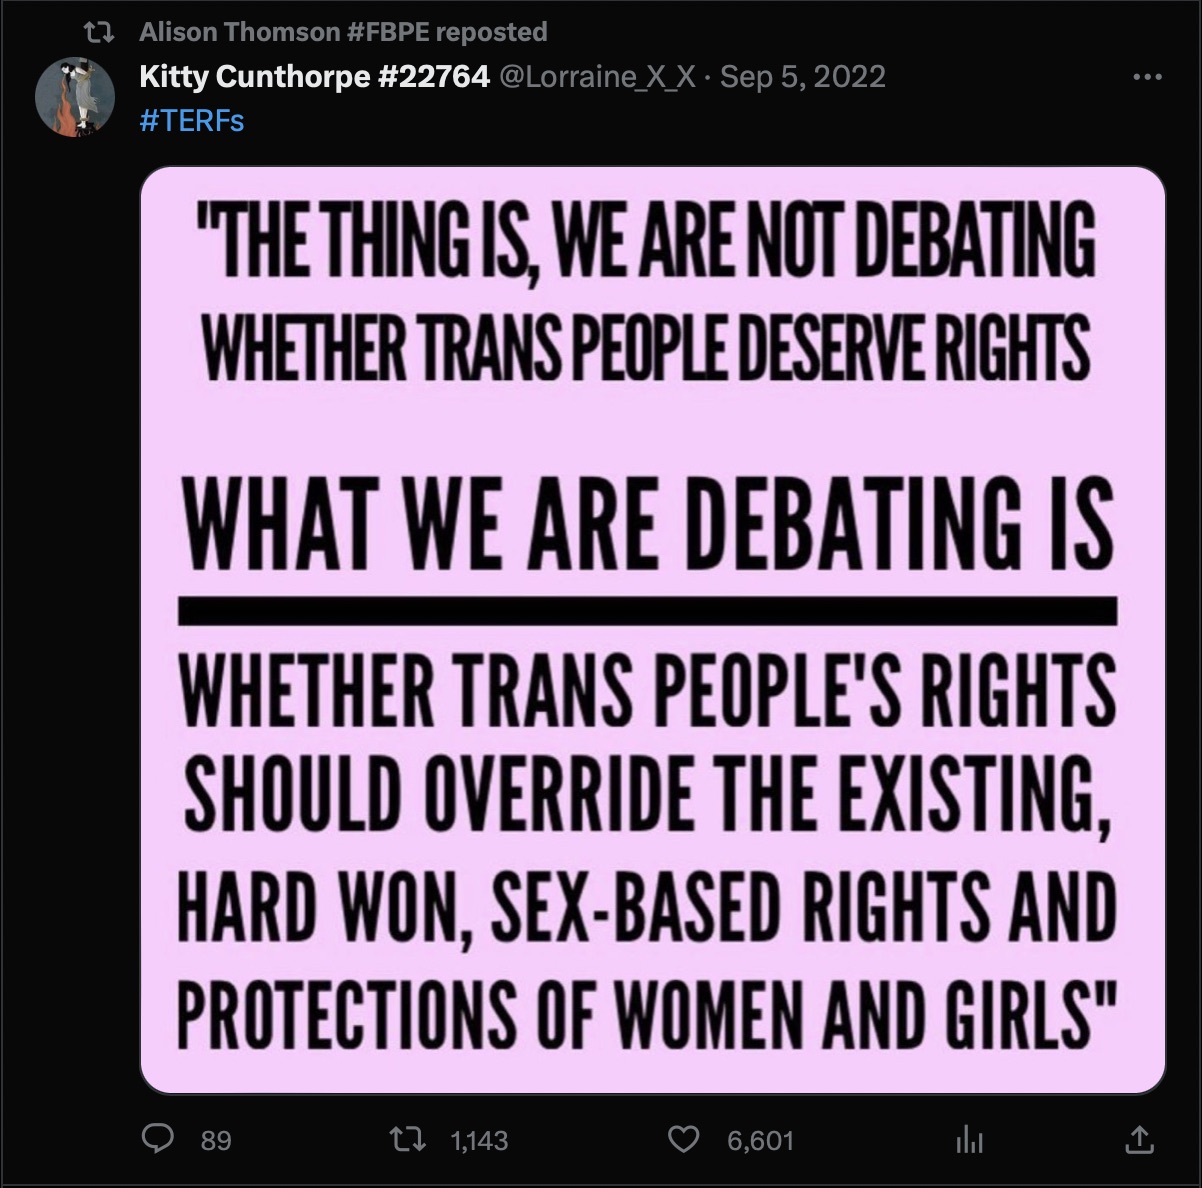 Screenshot of a tweet retweeted by Cllr Alison Thomson which has the caption '#TERFs' and an image that says 'THE THING IS WE ARE NOT DEBATING WHETHER TRANS PEOPLE DESERVE RIGHTS. WHAT WE ARE DEBATING IS WHETHER TRANS PEOPLE'S RIGHTS SHOULD OVERRIDE THE EXISTING, HARD WON. SEX-BASED RIGHTS AND PROTECTIONS OF WOMEN AND GIRLS'